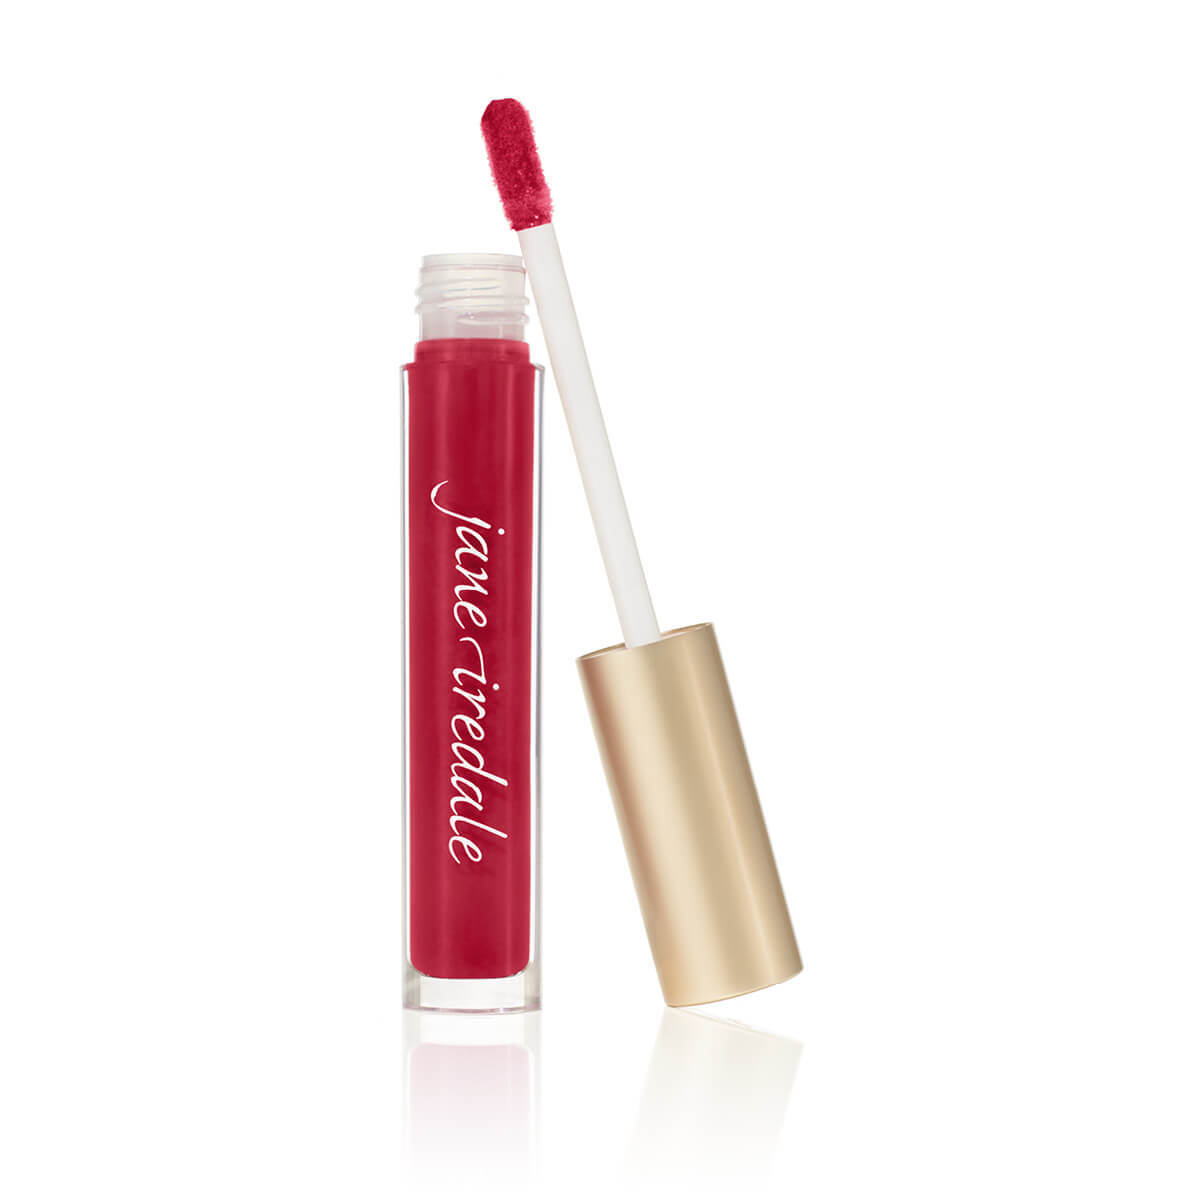 Billede af Jane Iredale HydroPure Hyaluronic Lip Gloss Berry Red - 3.75 ml.